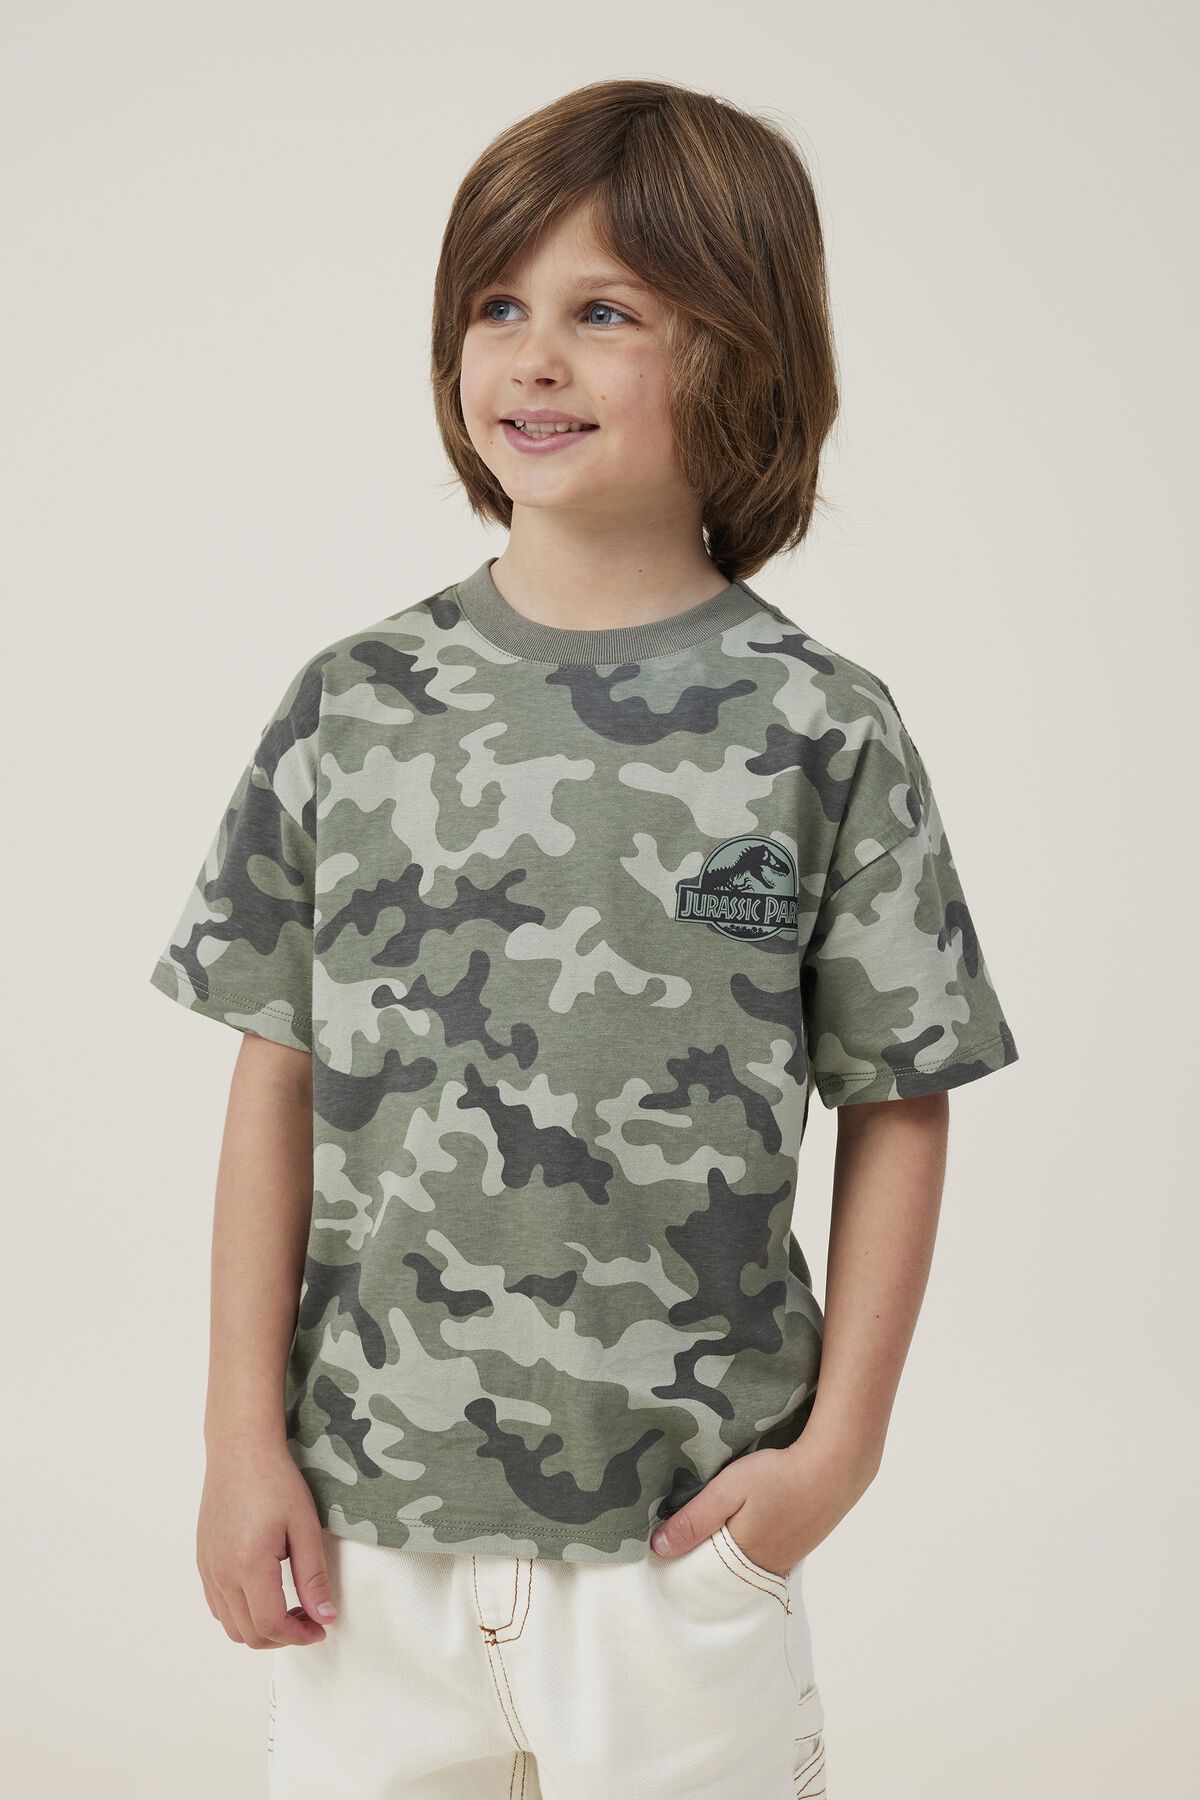 Boys Clothes & Accessories | Cotton On Kids